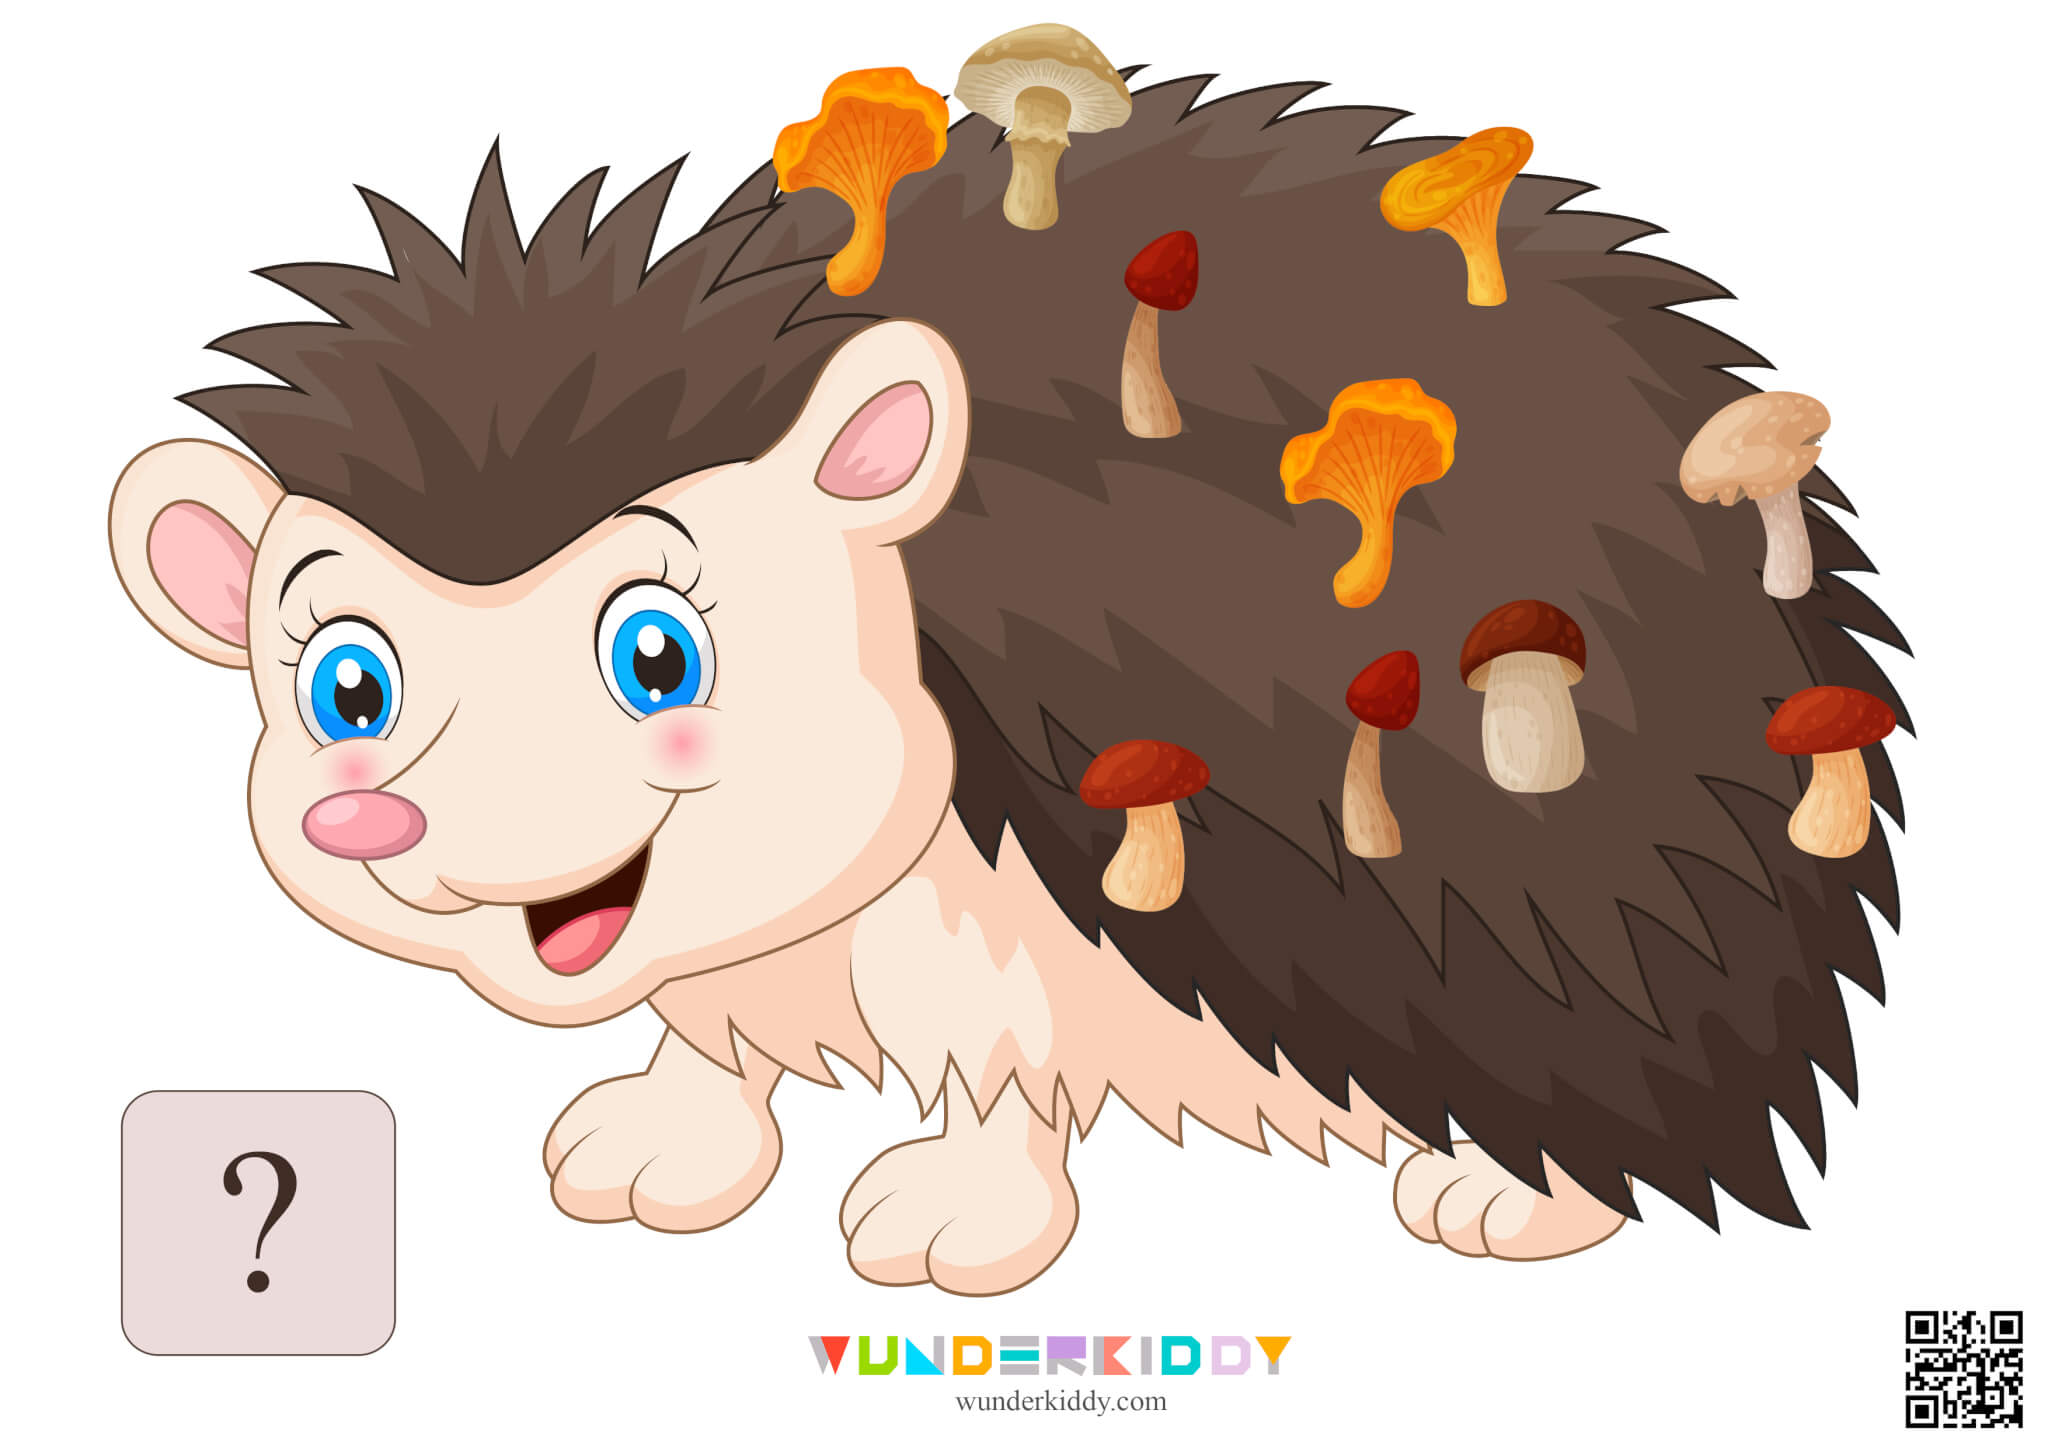 Worksheet Count to 20 with Hedgehog and Mushrooms - Image 14